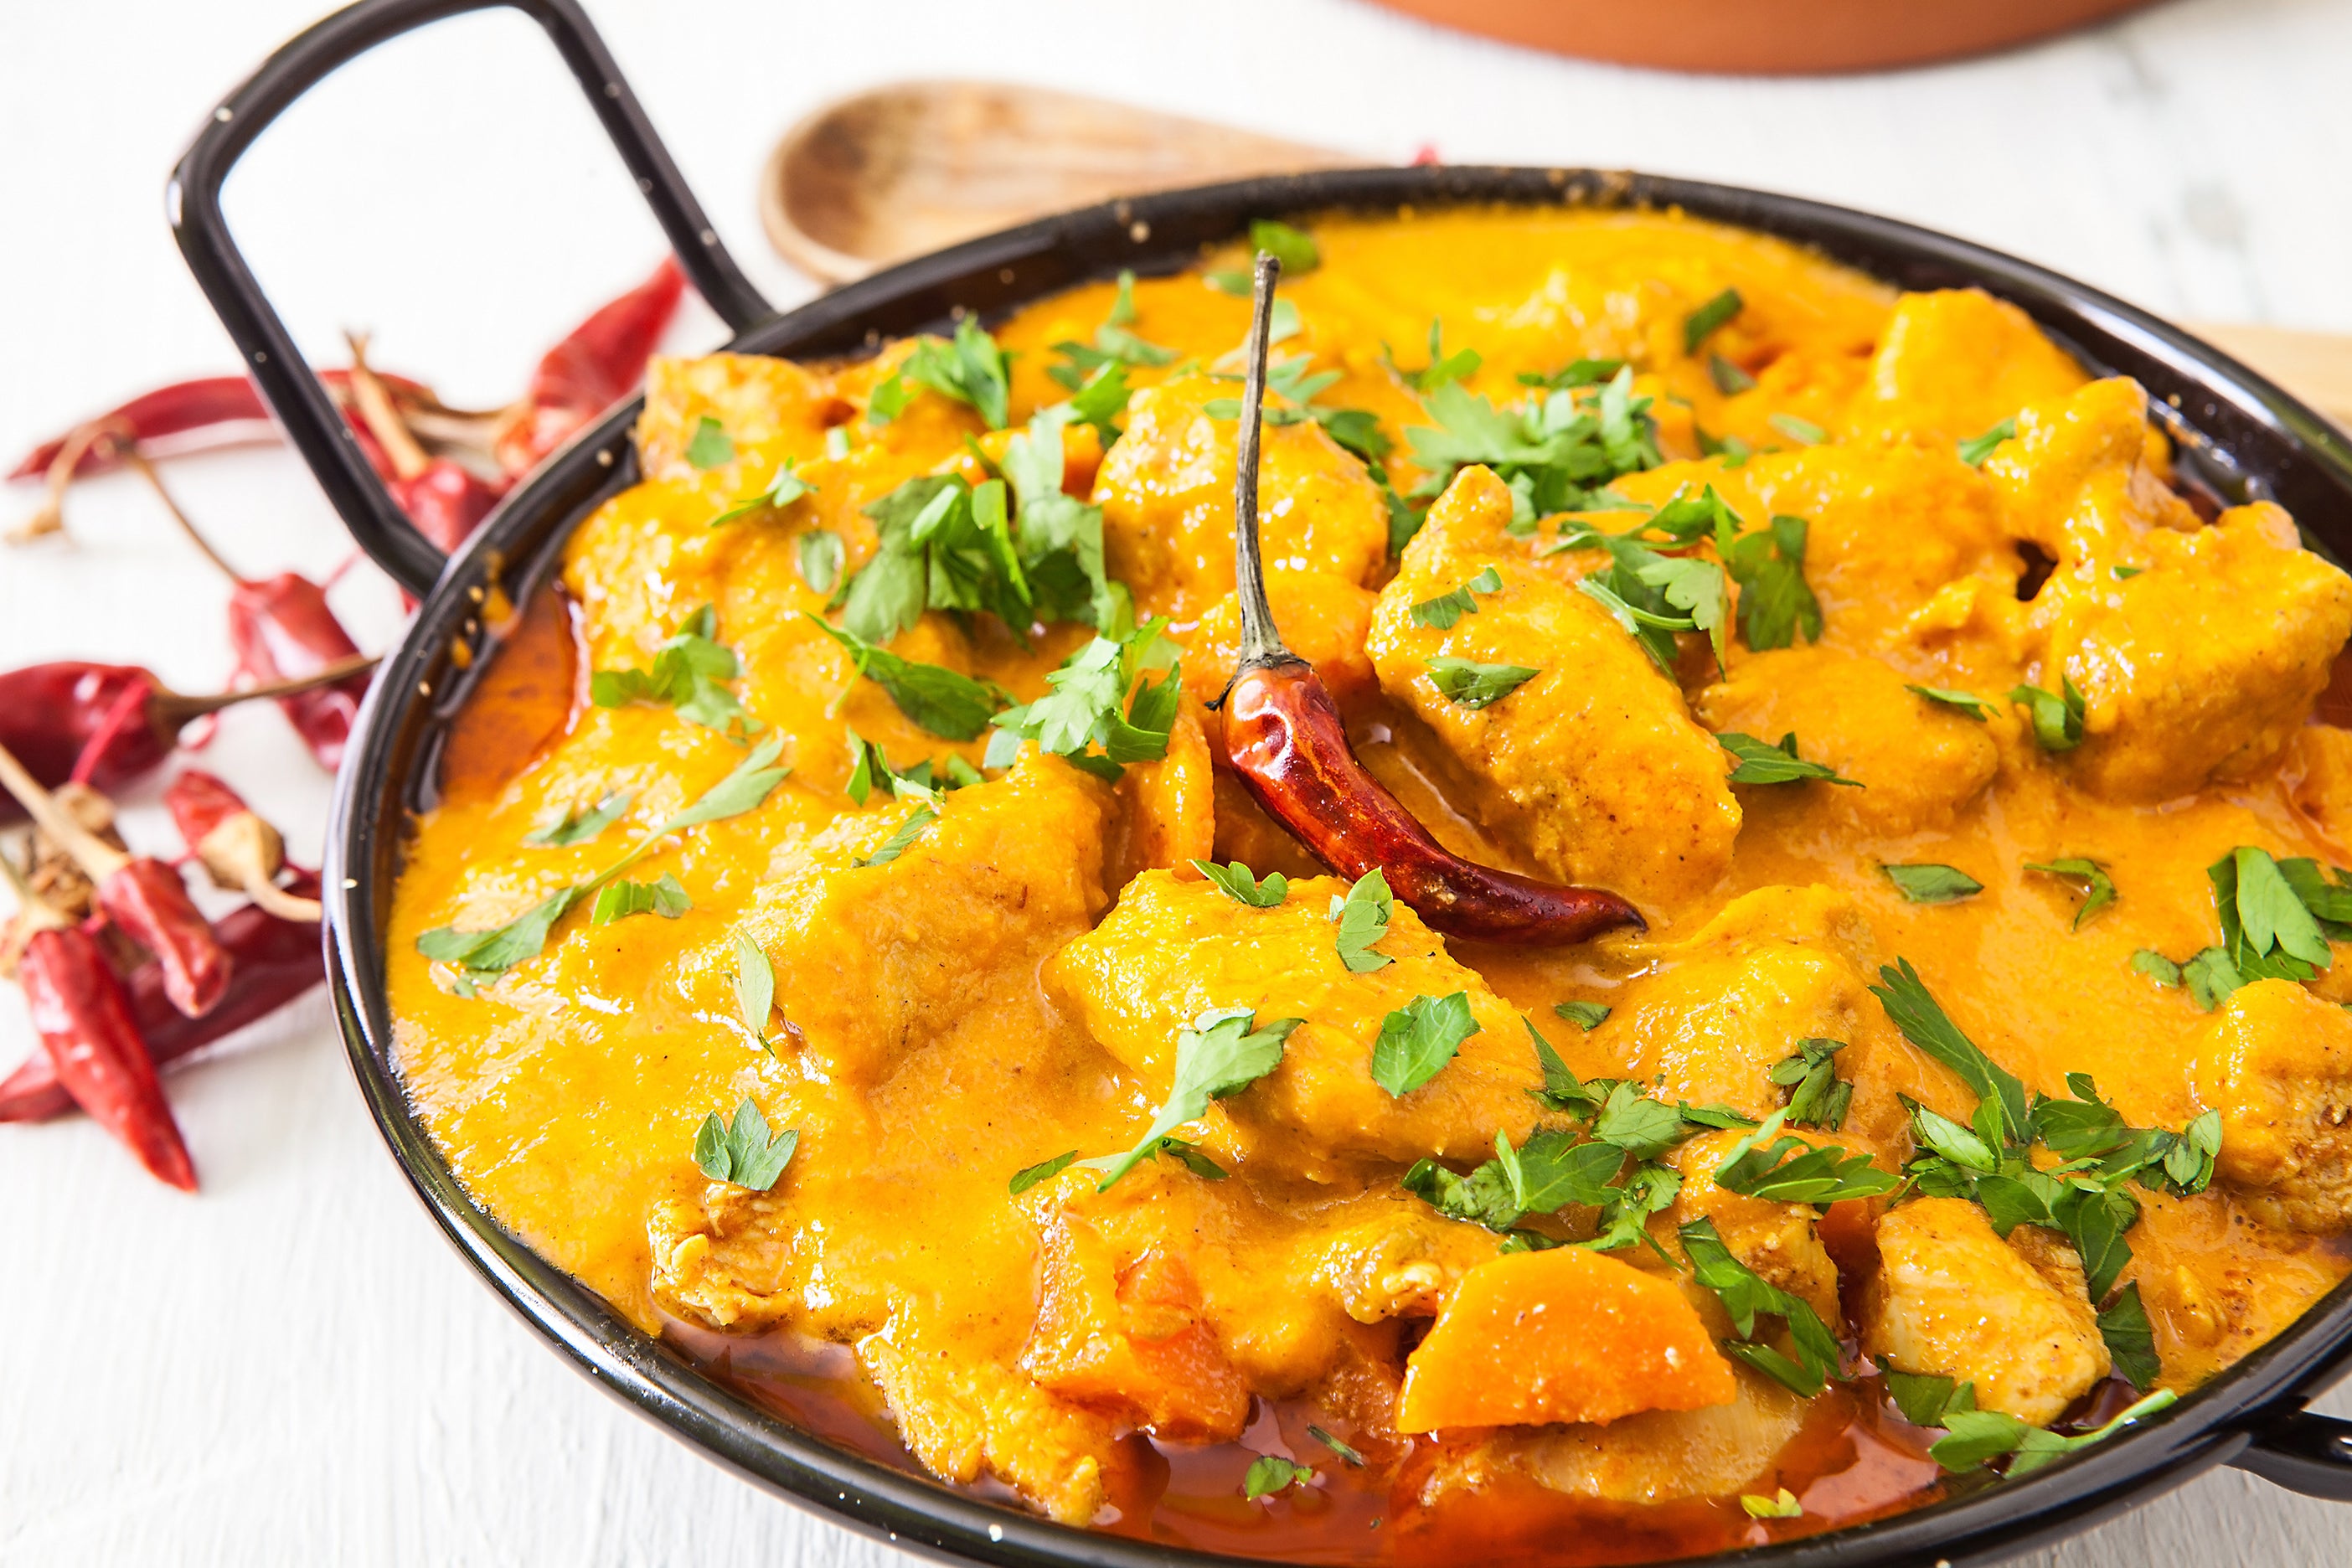 Indian Curry is a spicy and flavorful dish made with meat or vegetables, and a blend of spices such as coriander, cumin, and turmeric.